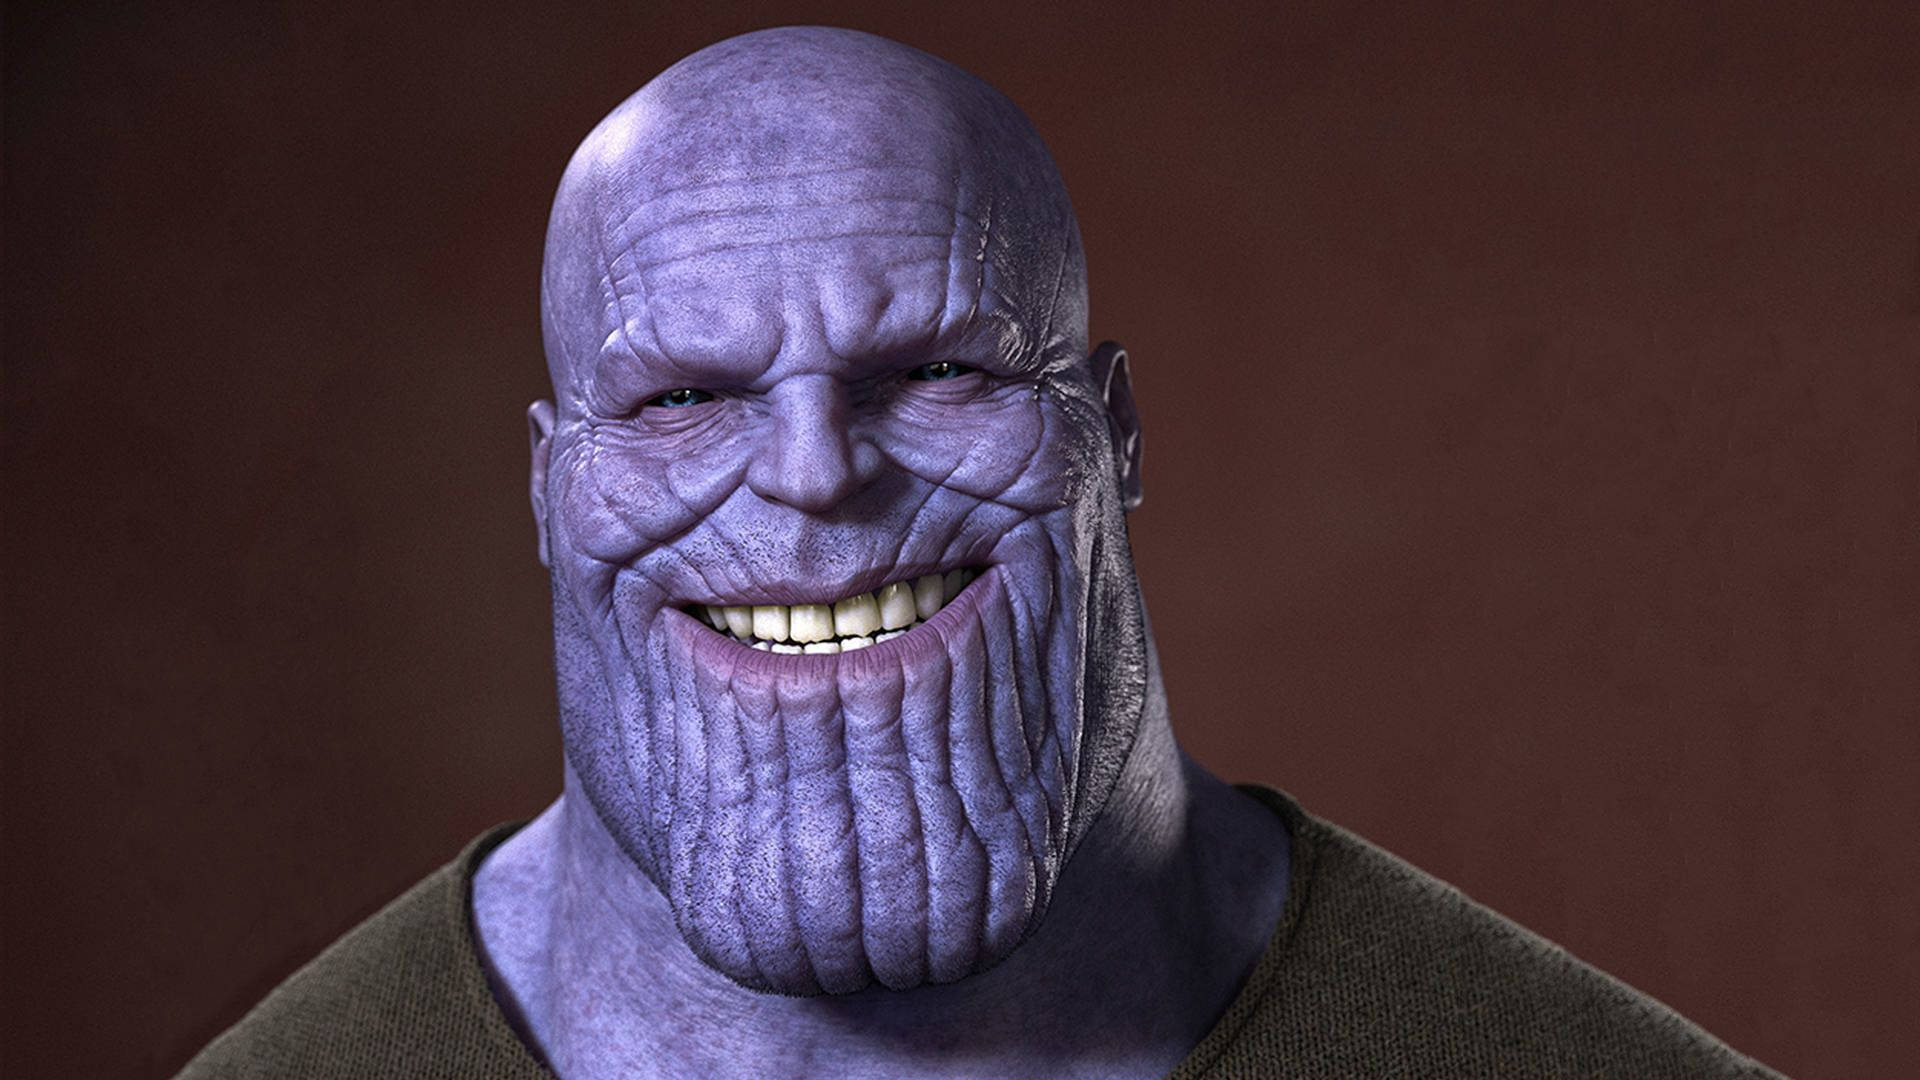 Thanos 1920X1080 Wallpaper and Background Image